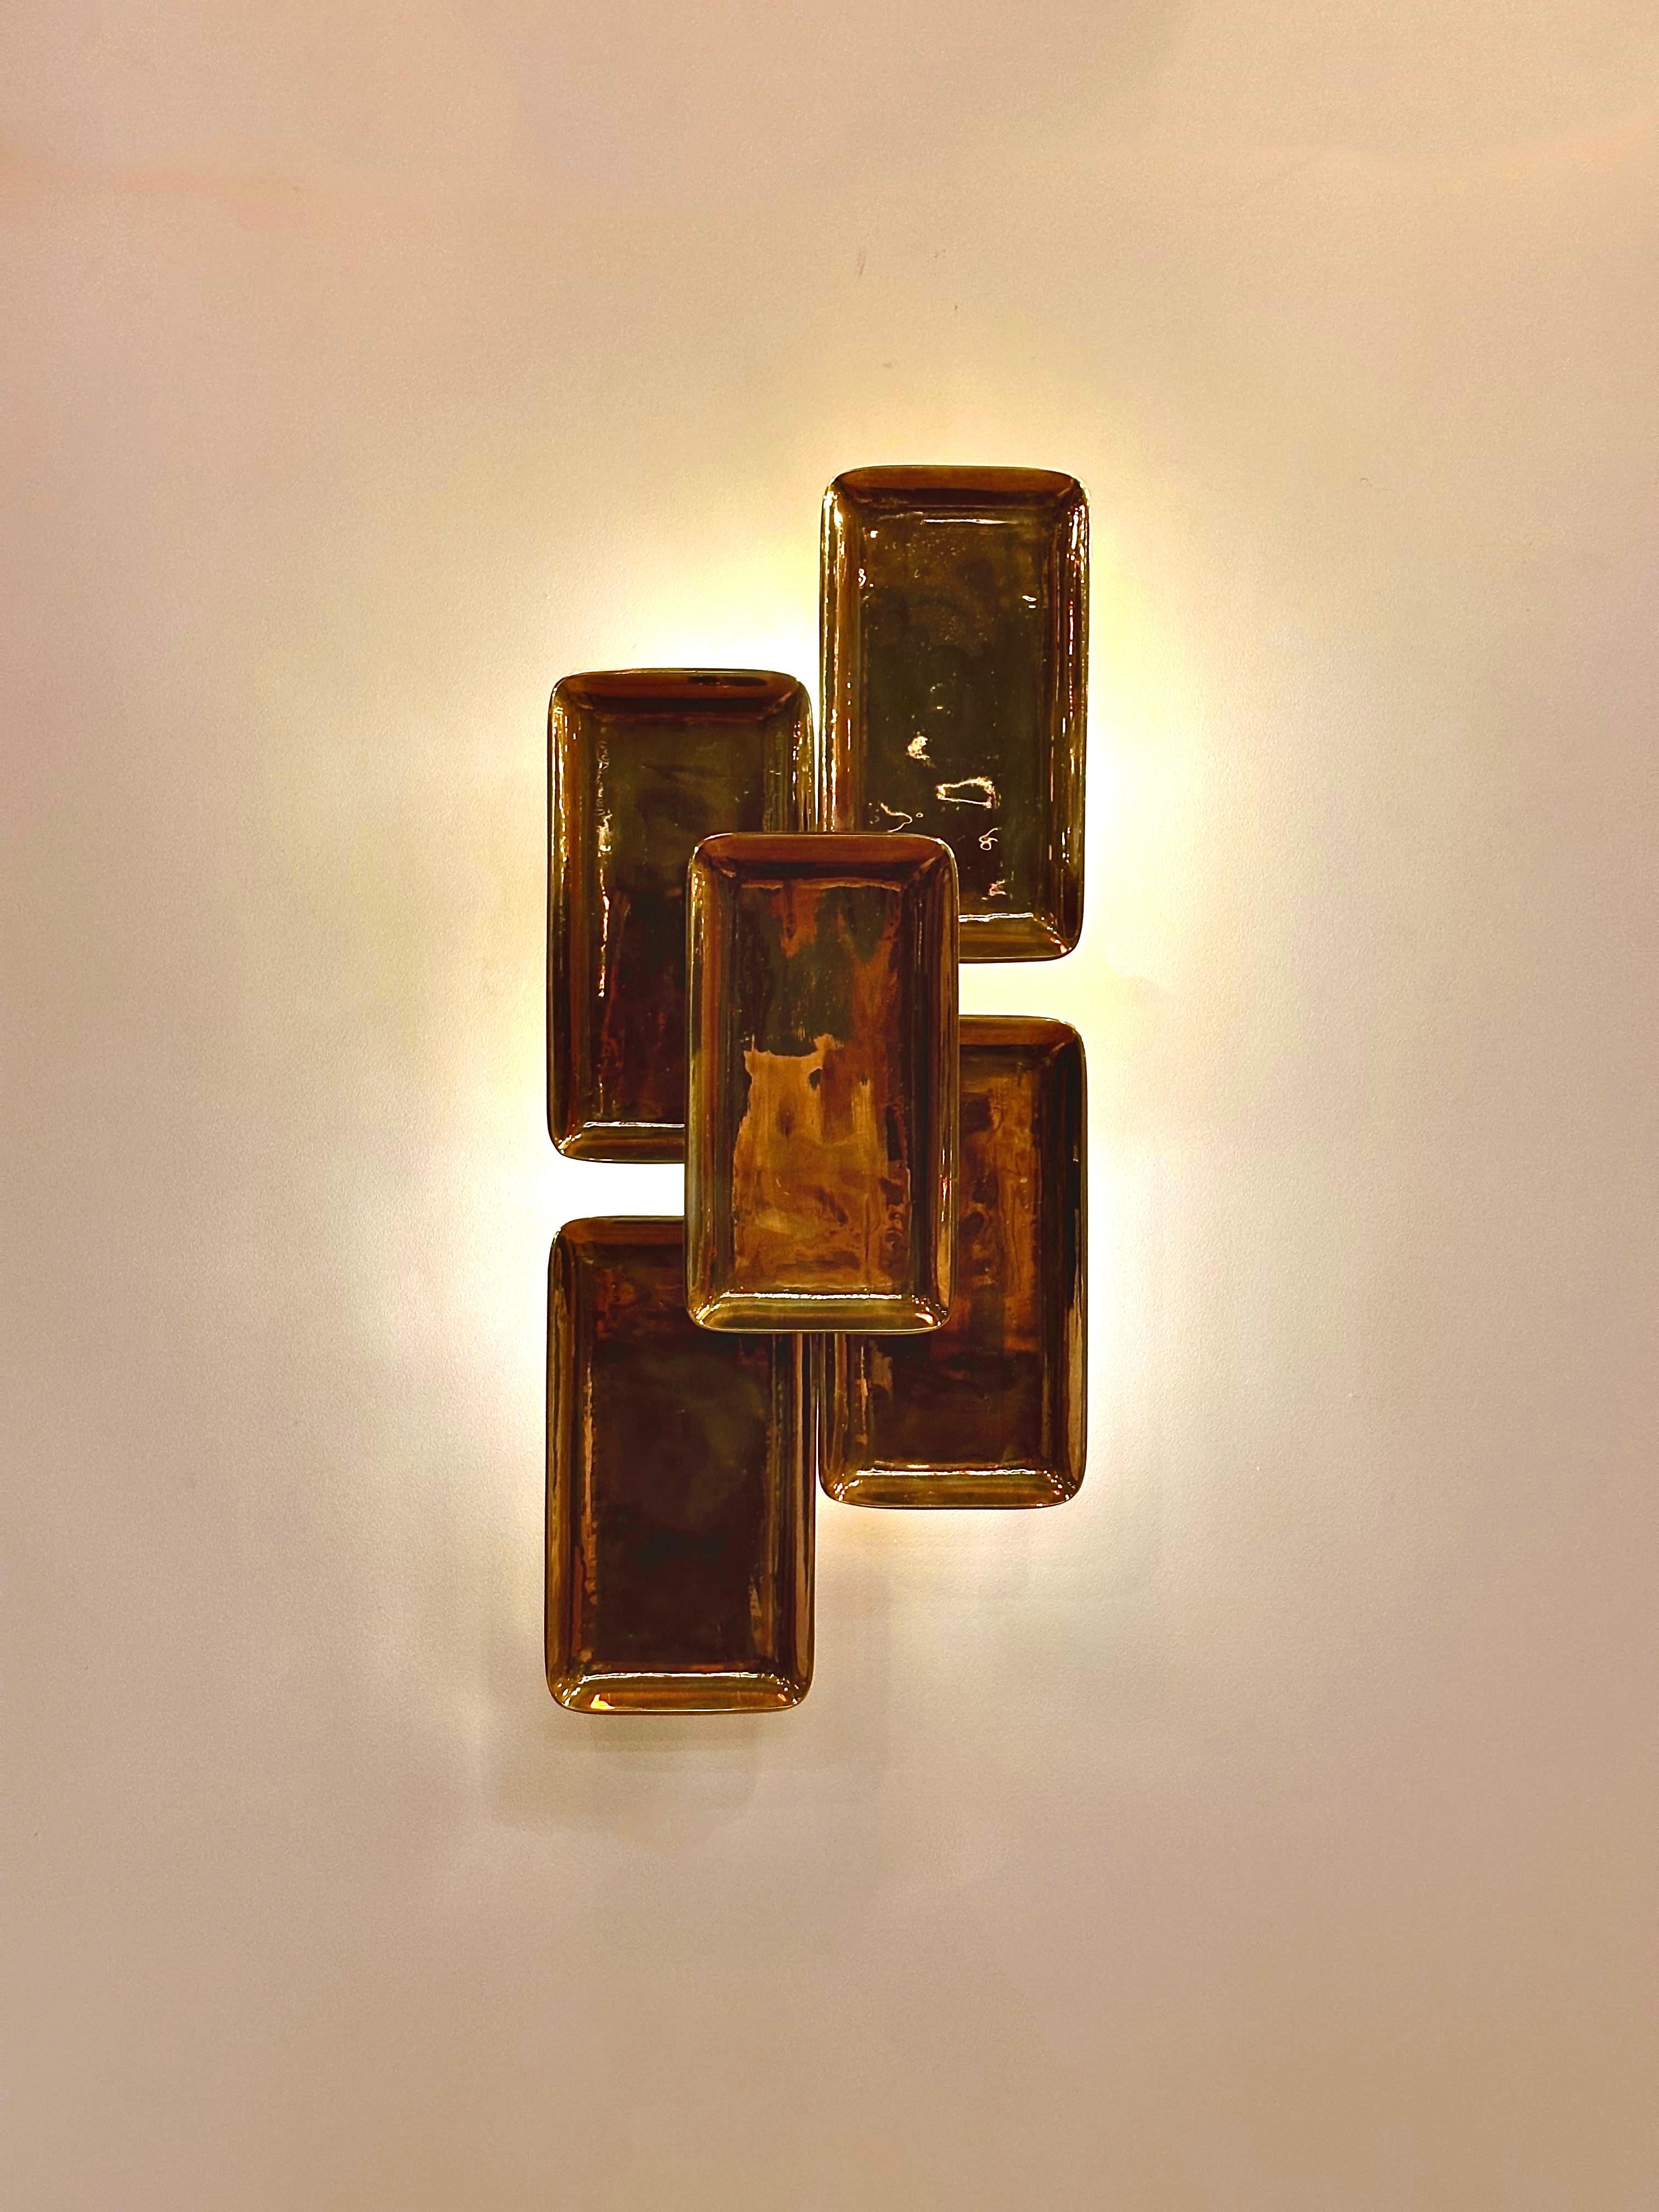 Turkish COMOR Brass Casting Monumental Wall Sconce  For Sale